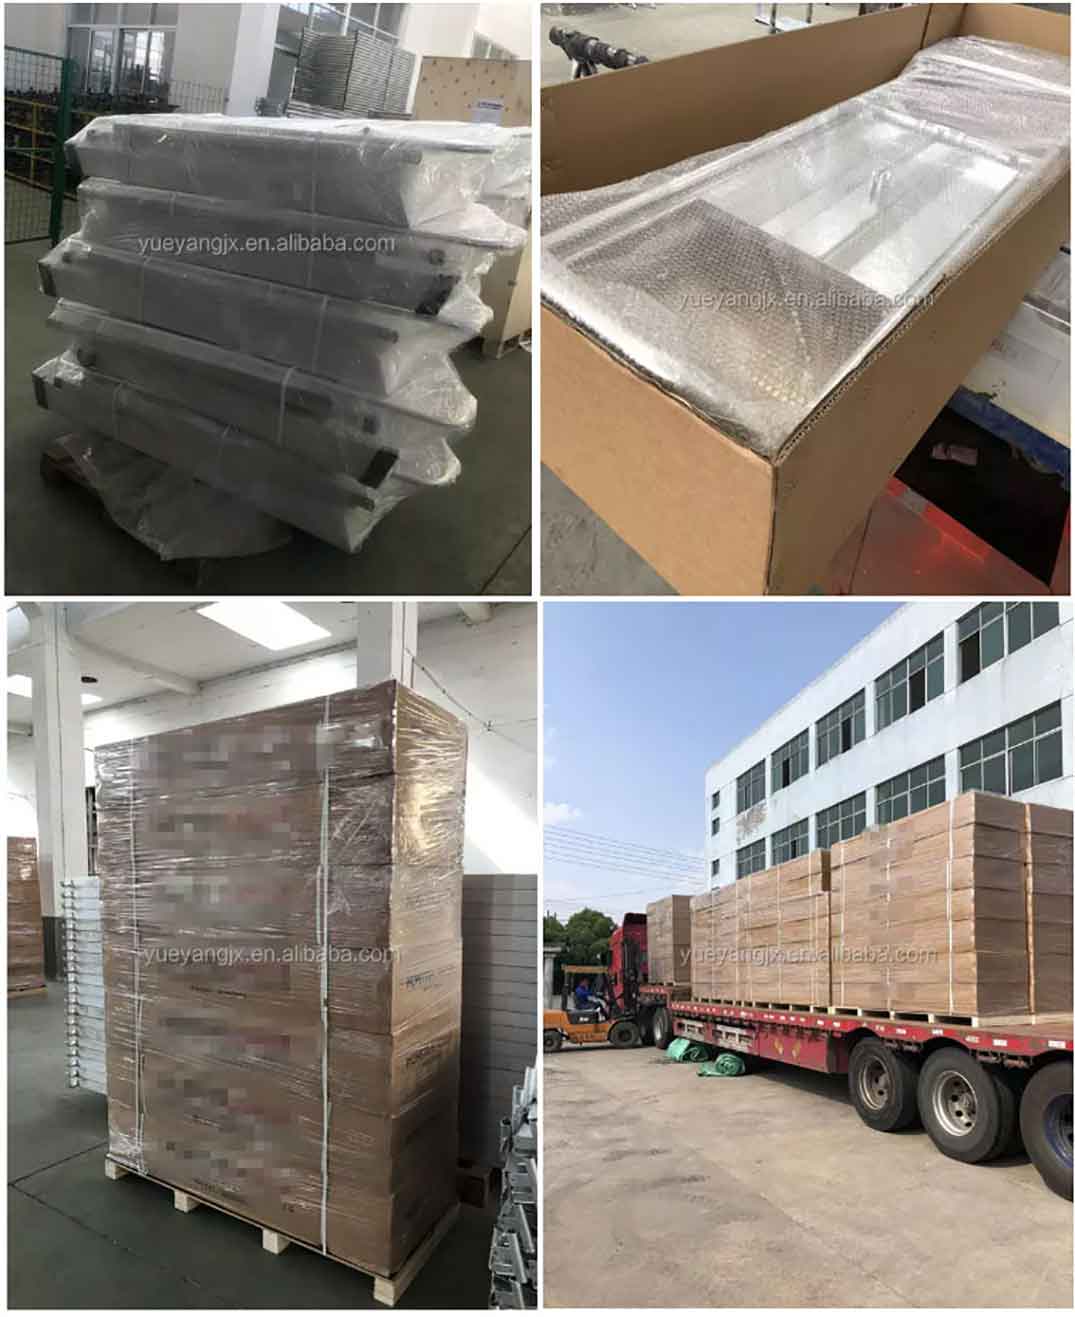 order picker ladder packing and shipping